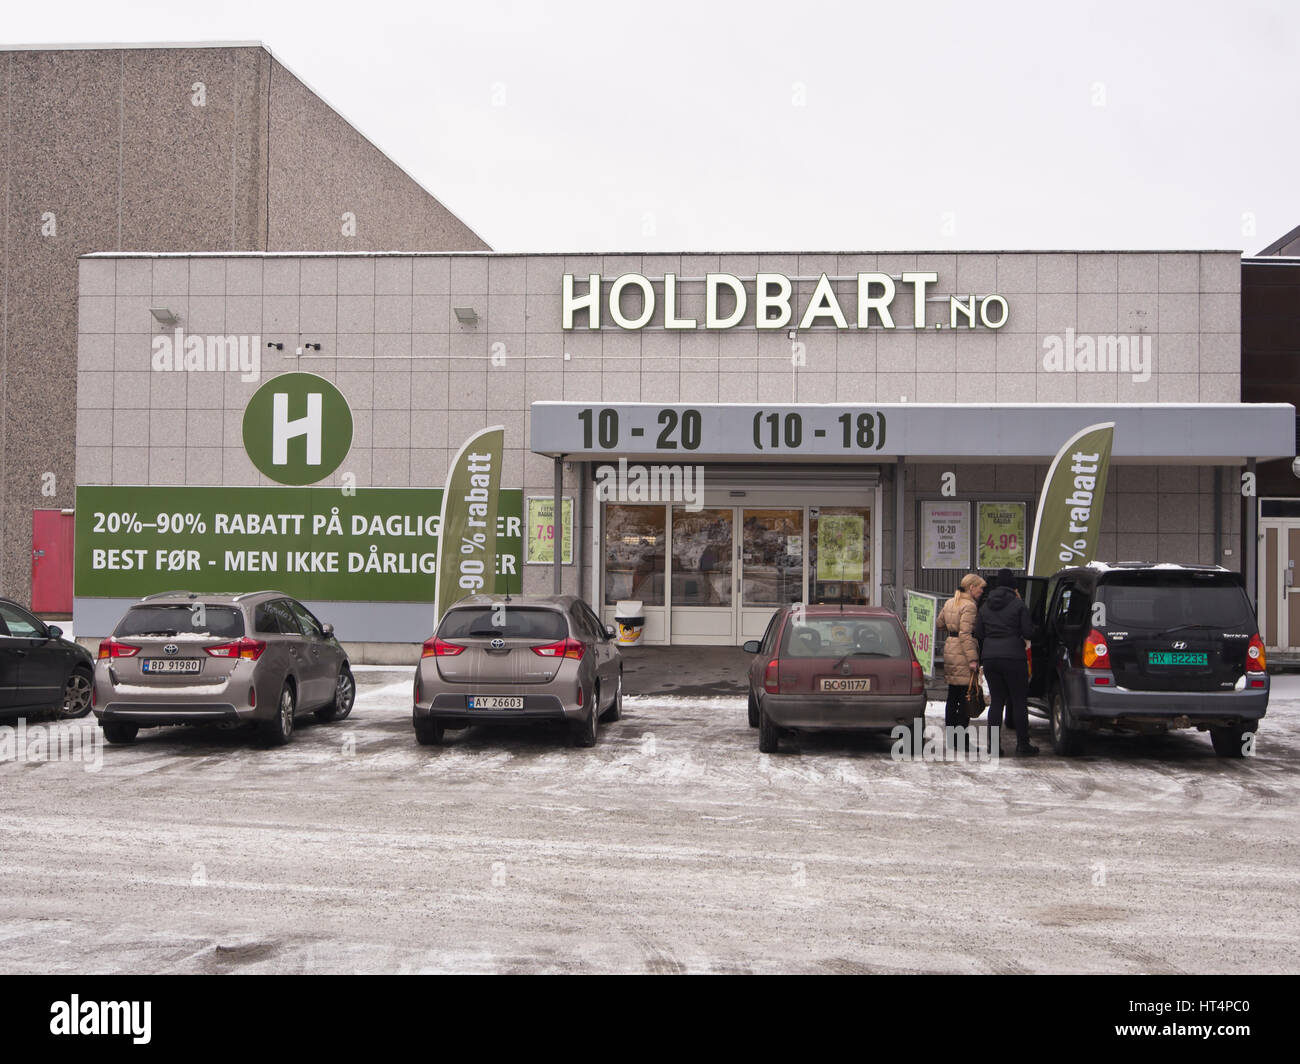 Holdbart.no, a shop that sells food passing best before date, at reduced price, an attempt at less waste and increased sustainability, Vestby Norway Stock Photo